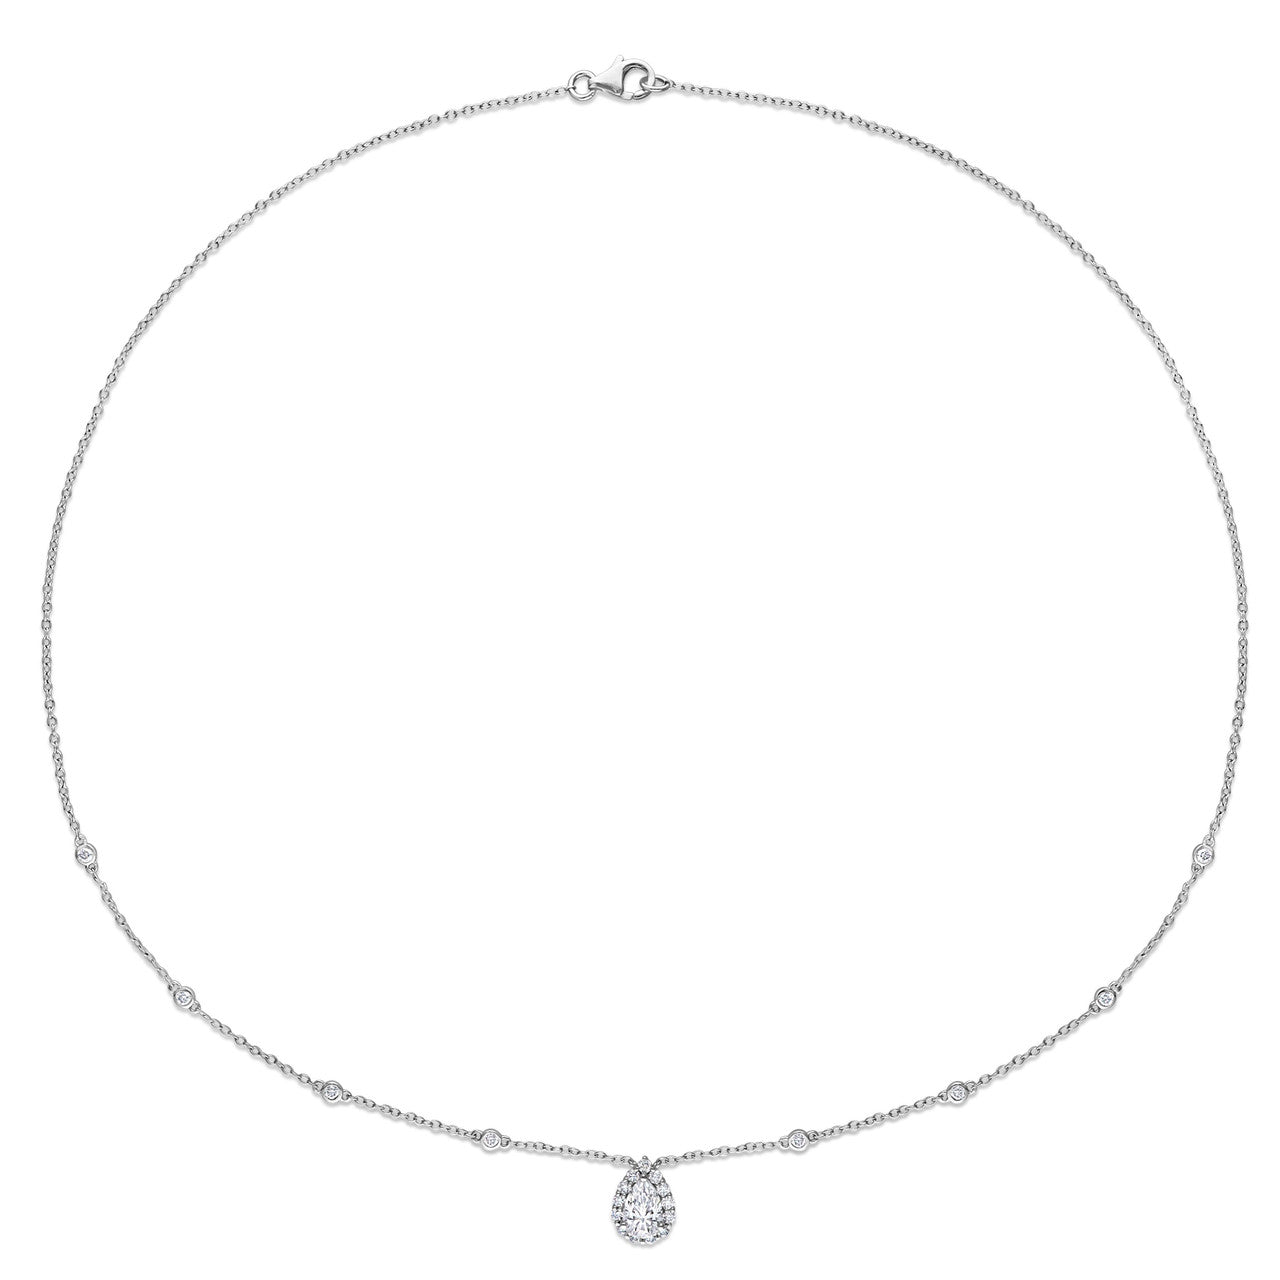 Ice Jewellery 1 1/2 CT Created Moissanite-White Halo Drop Necklace With Chain in Sterling Silver - 75000005753 | Ice Jewellery Australia